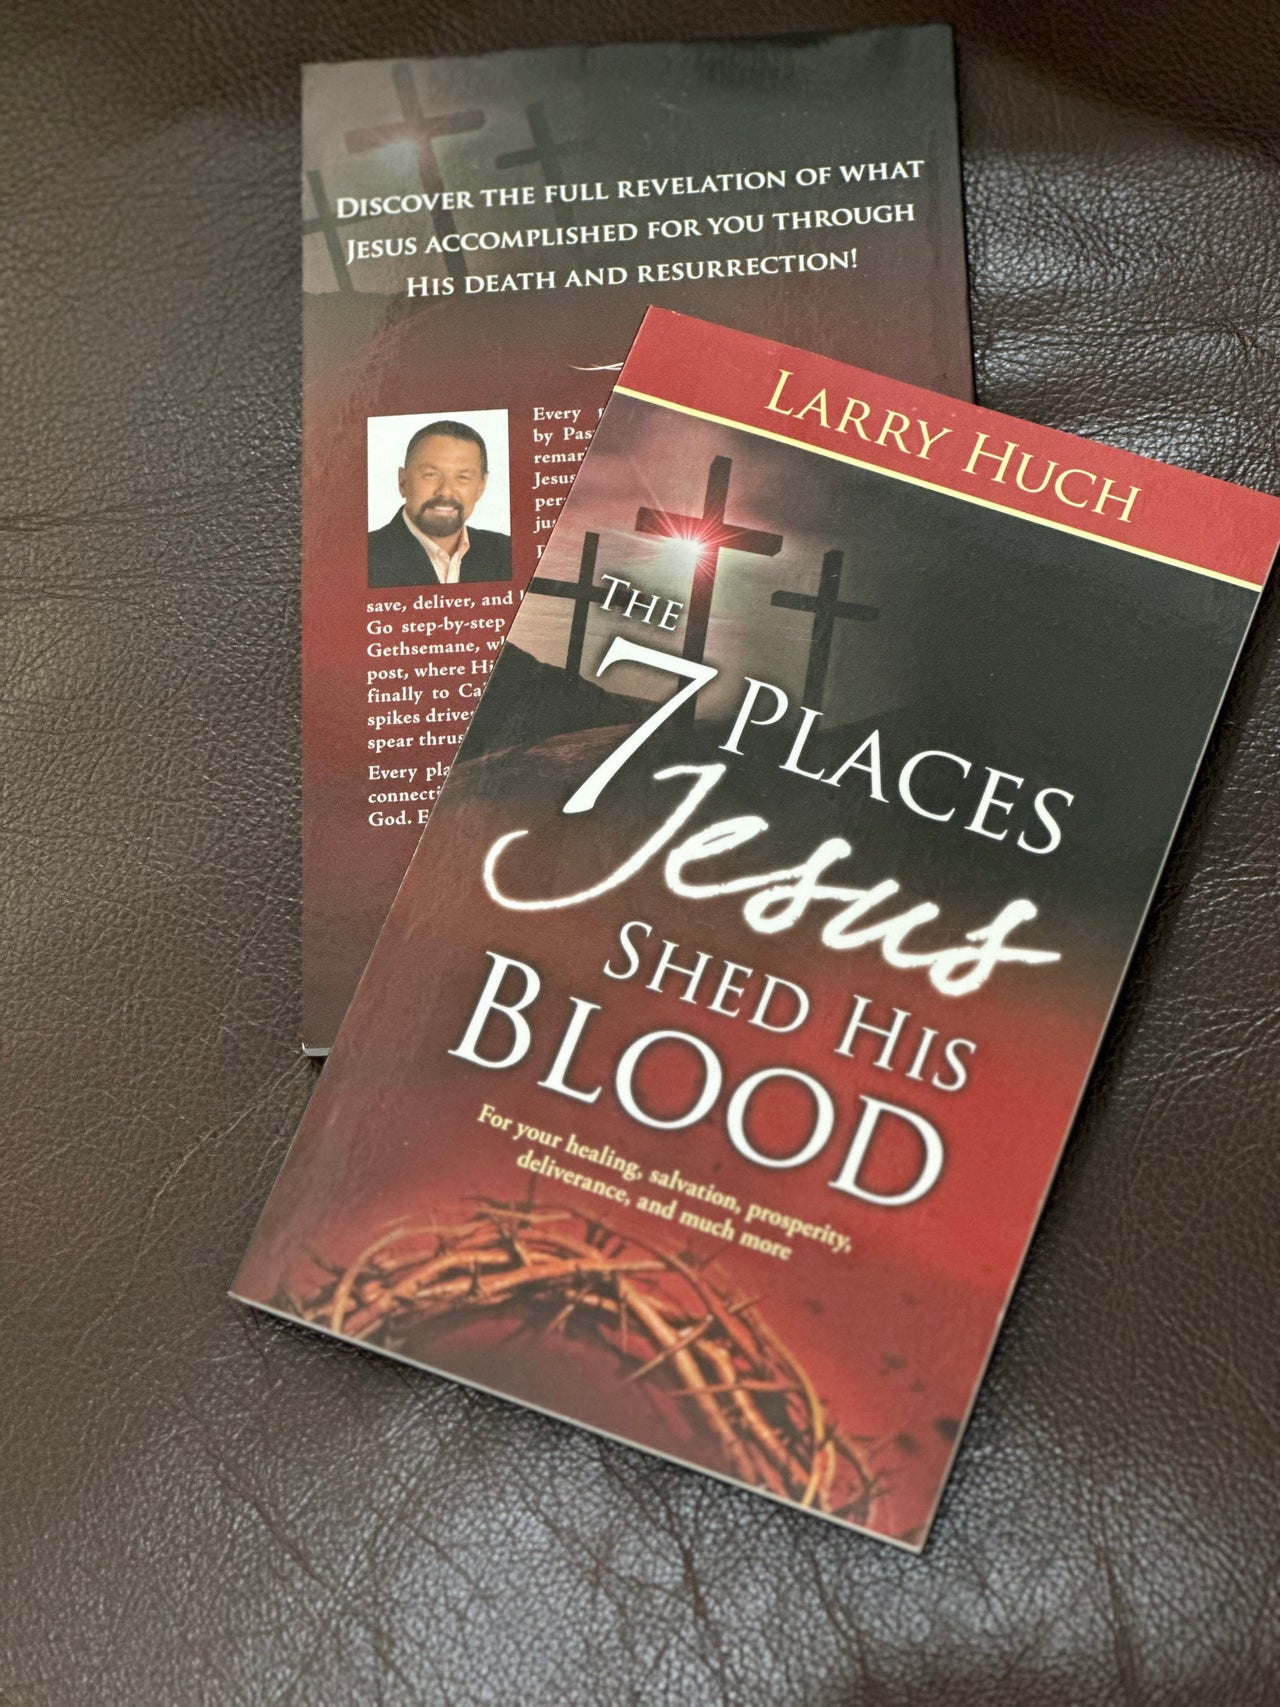 The 7 Places Jesus Shed His Blood Larry Huch